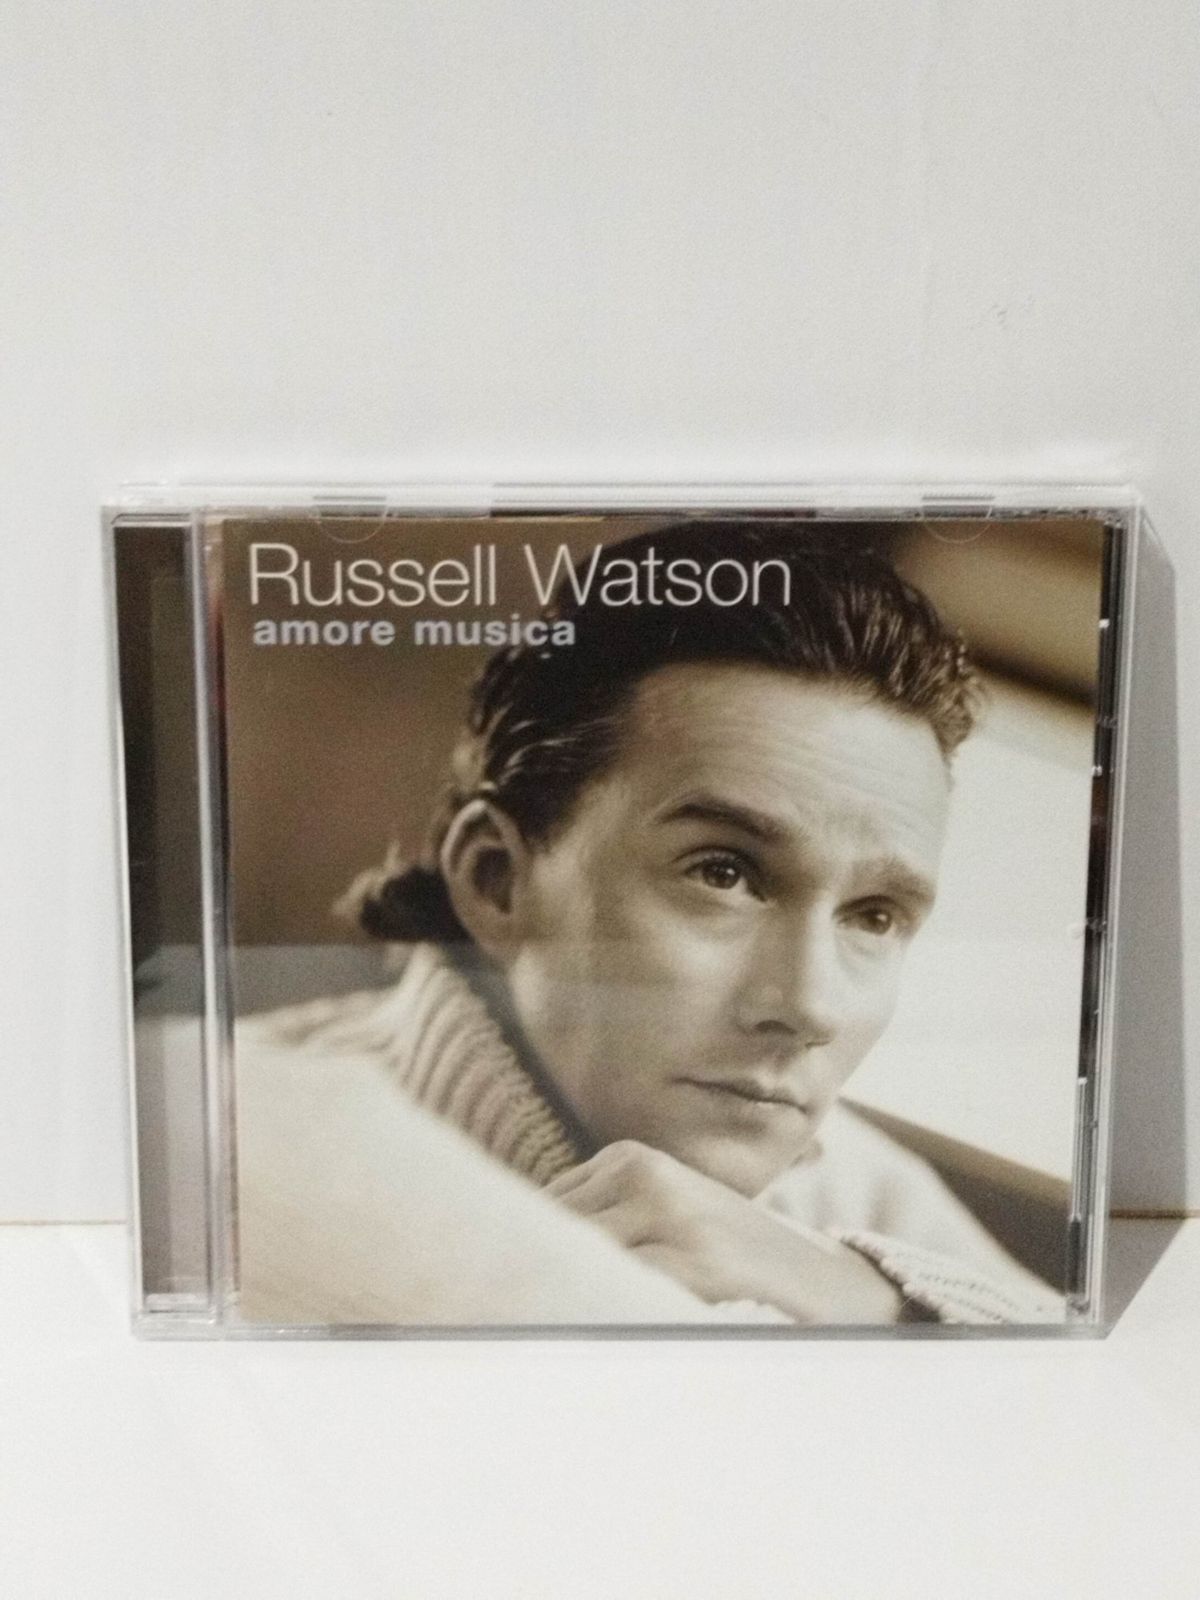 Russell Watson / Amore Musica ◇ ラッセル・ワトソン / アモーレ・ムジカ ◇ 国内盤帯付 ◇ -  www.rfbroadcast.com